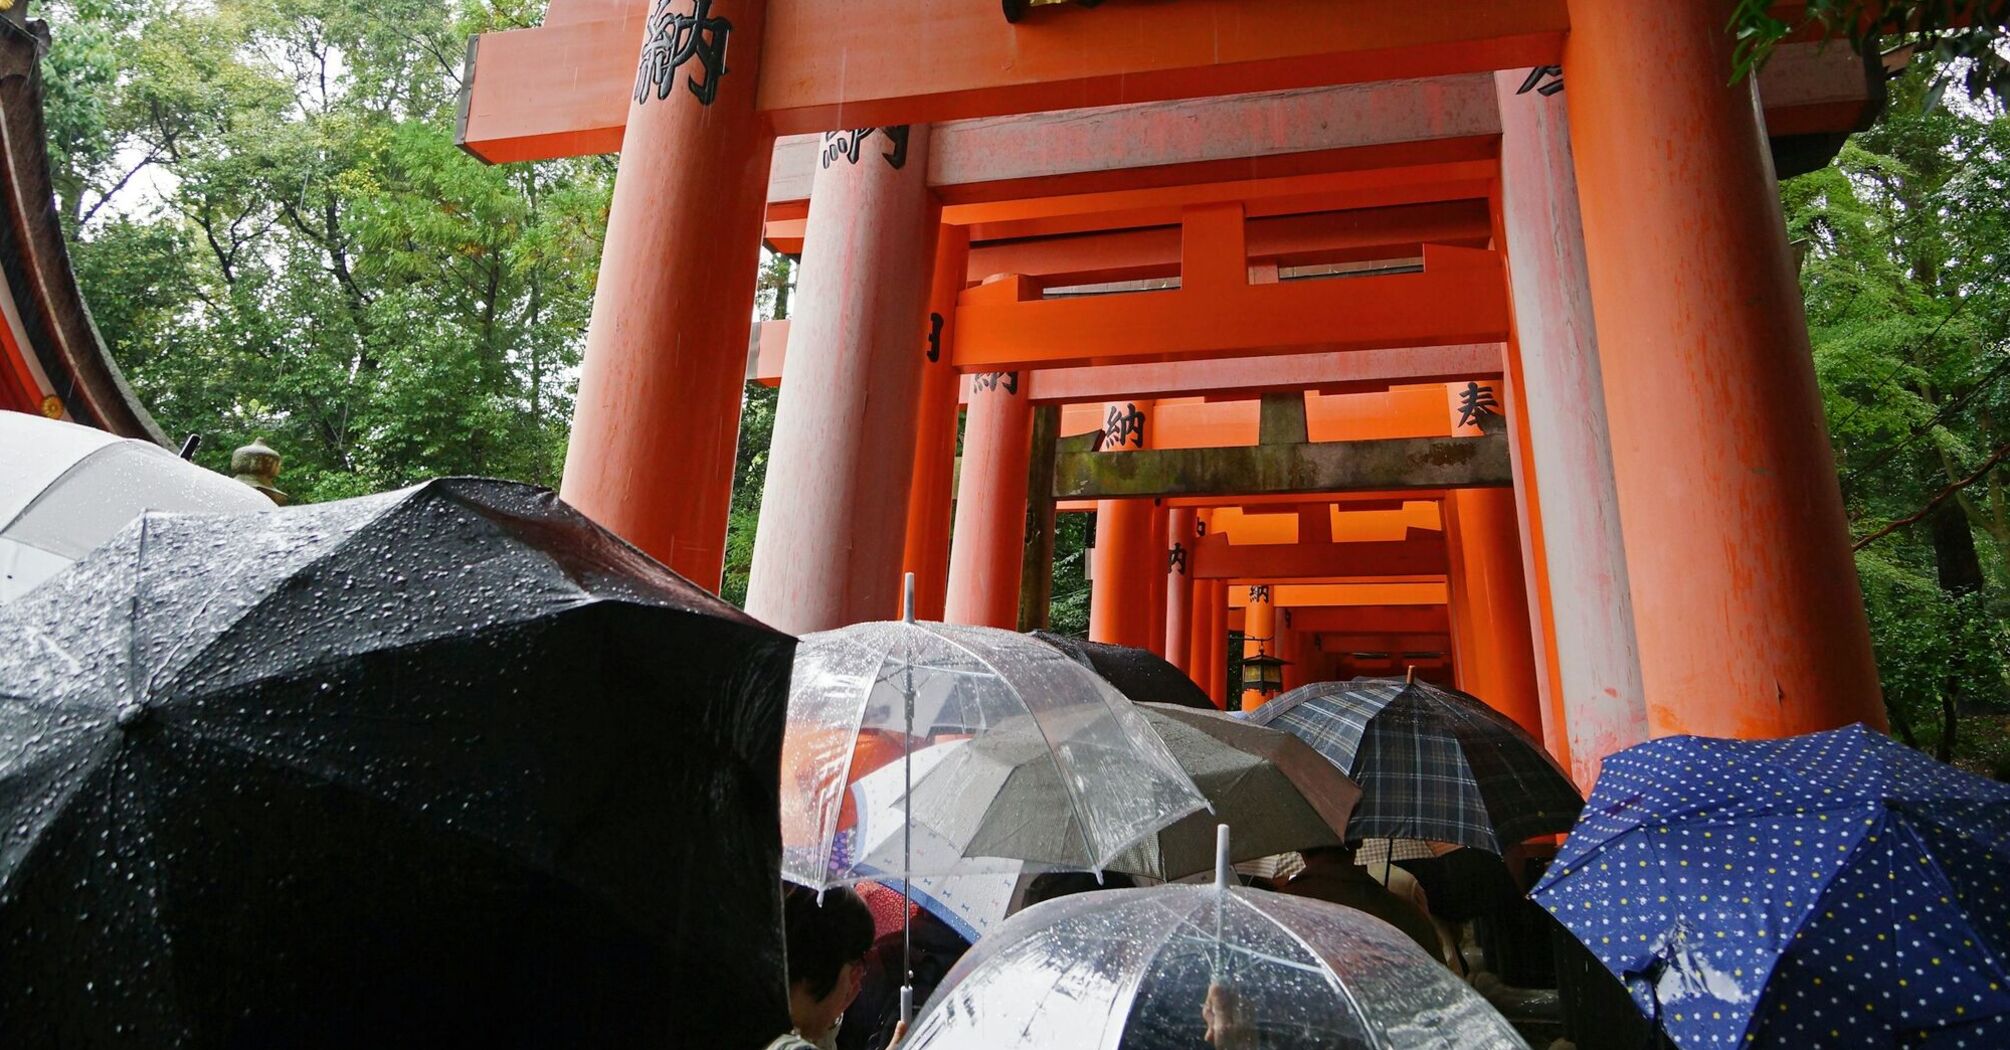 A group of japanese tourists with umbrellas